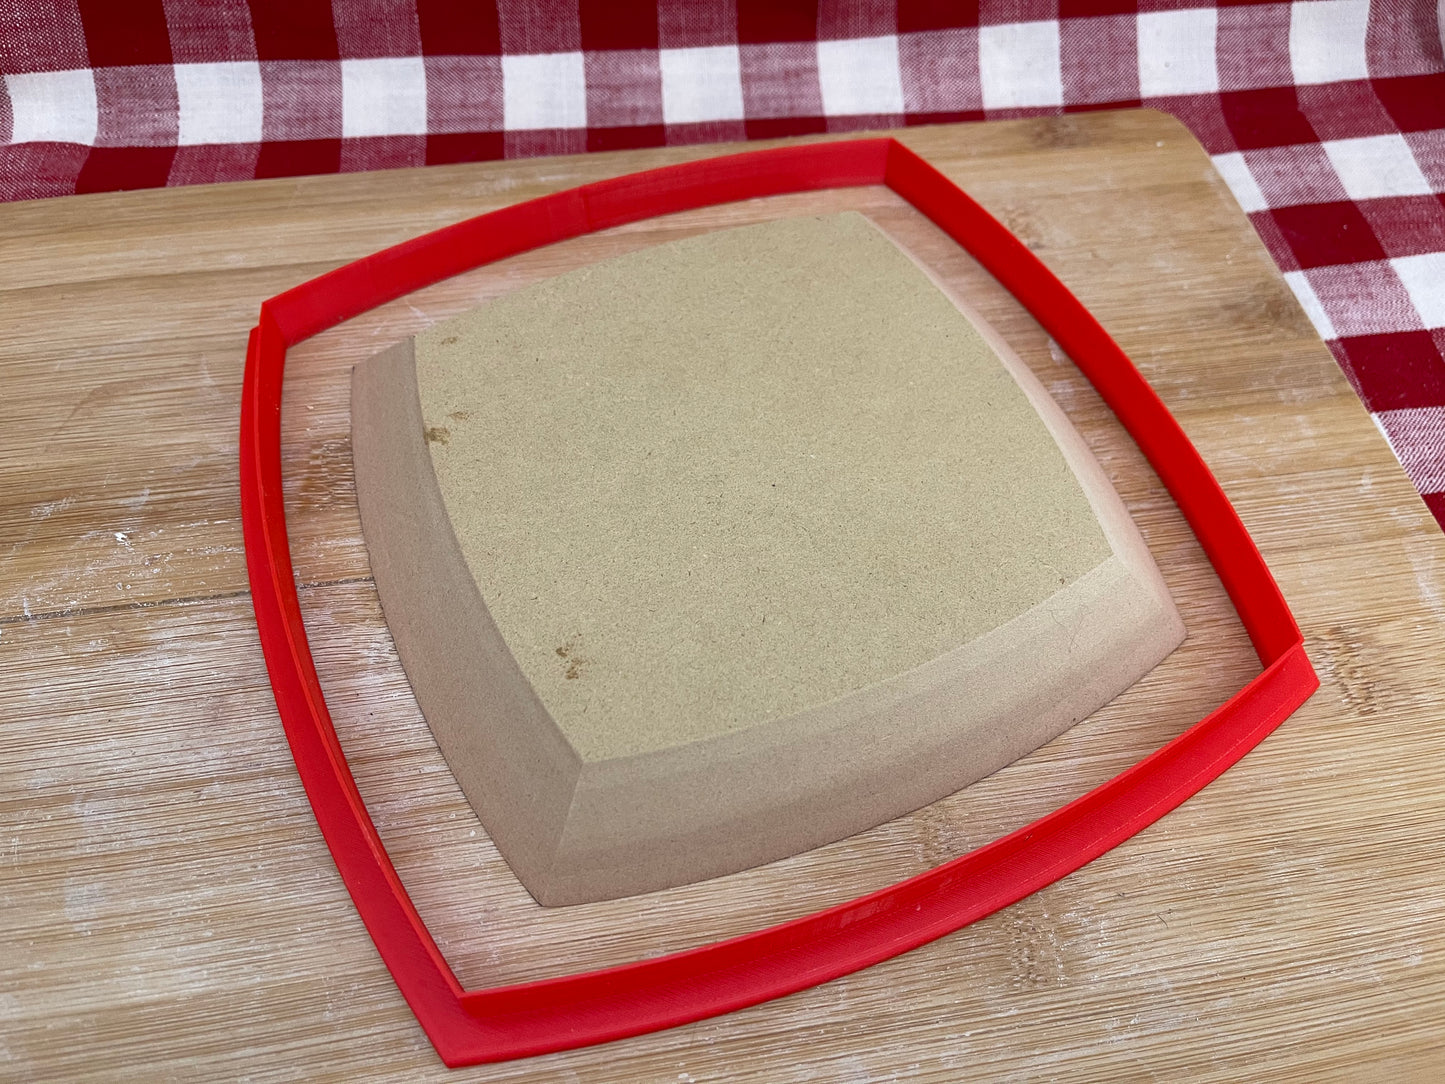 Plain Spherical Square, Clay Cutter - plastic 3D printed, pottery tool, multiple sizes